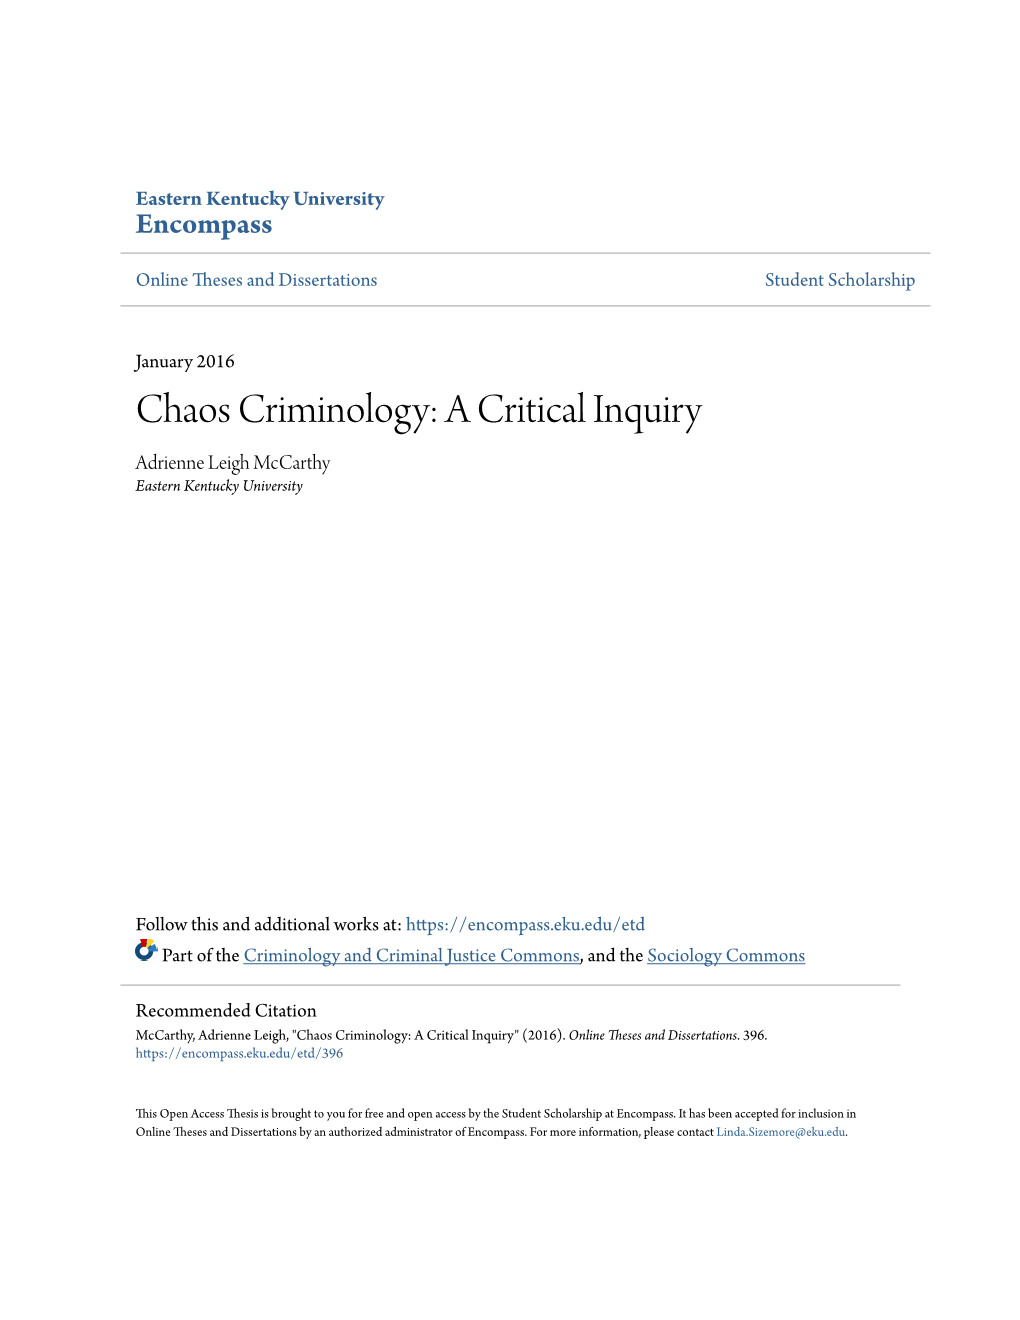 Chaos Criminology: a Critical Inquiry Adrienne Leigh Mccarthy Eastern Kentucky University